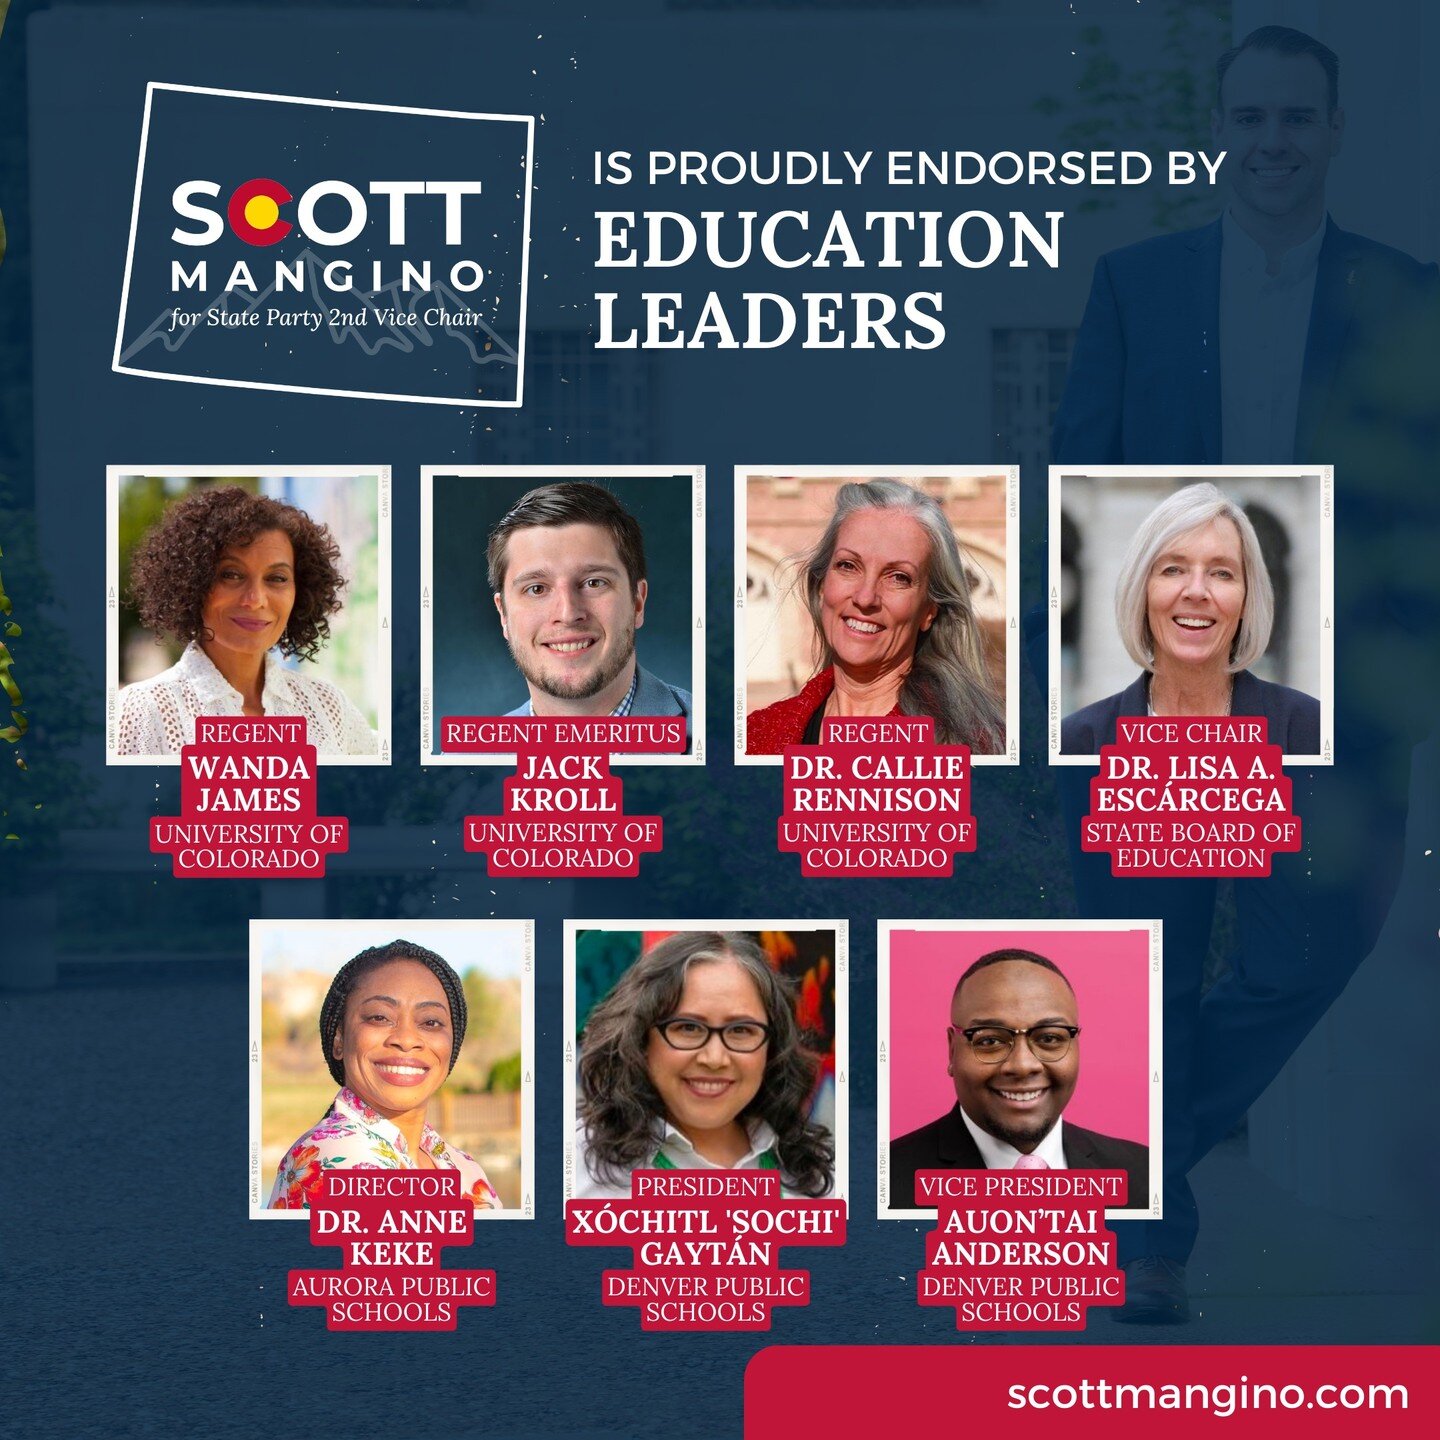 Their inability to win statewide or in the Capitol has forced the #GOP to target our school boards - where they silence our #educators, whitewash history, &amp; bring harm to our students. Proud to have the support of these education leaders who figh